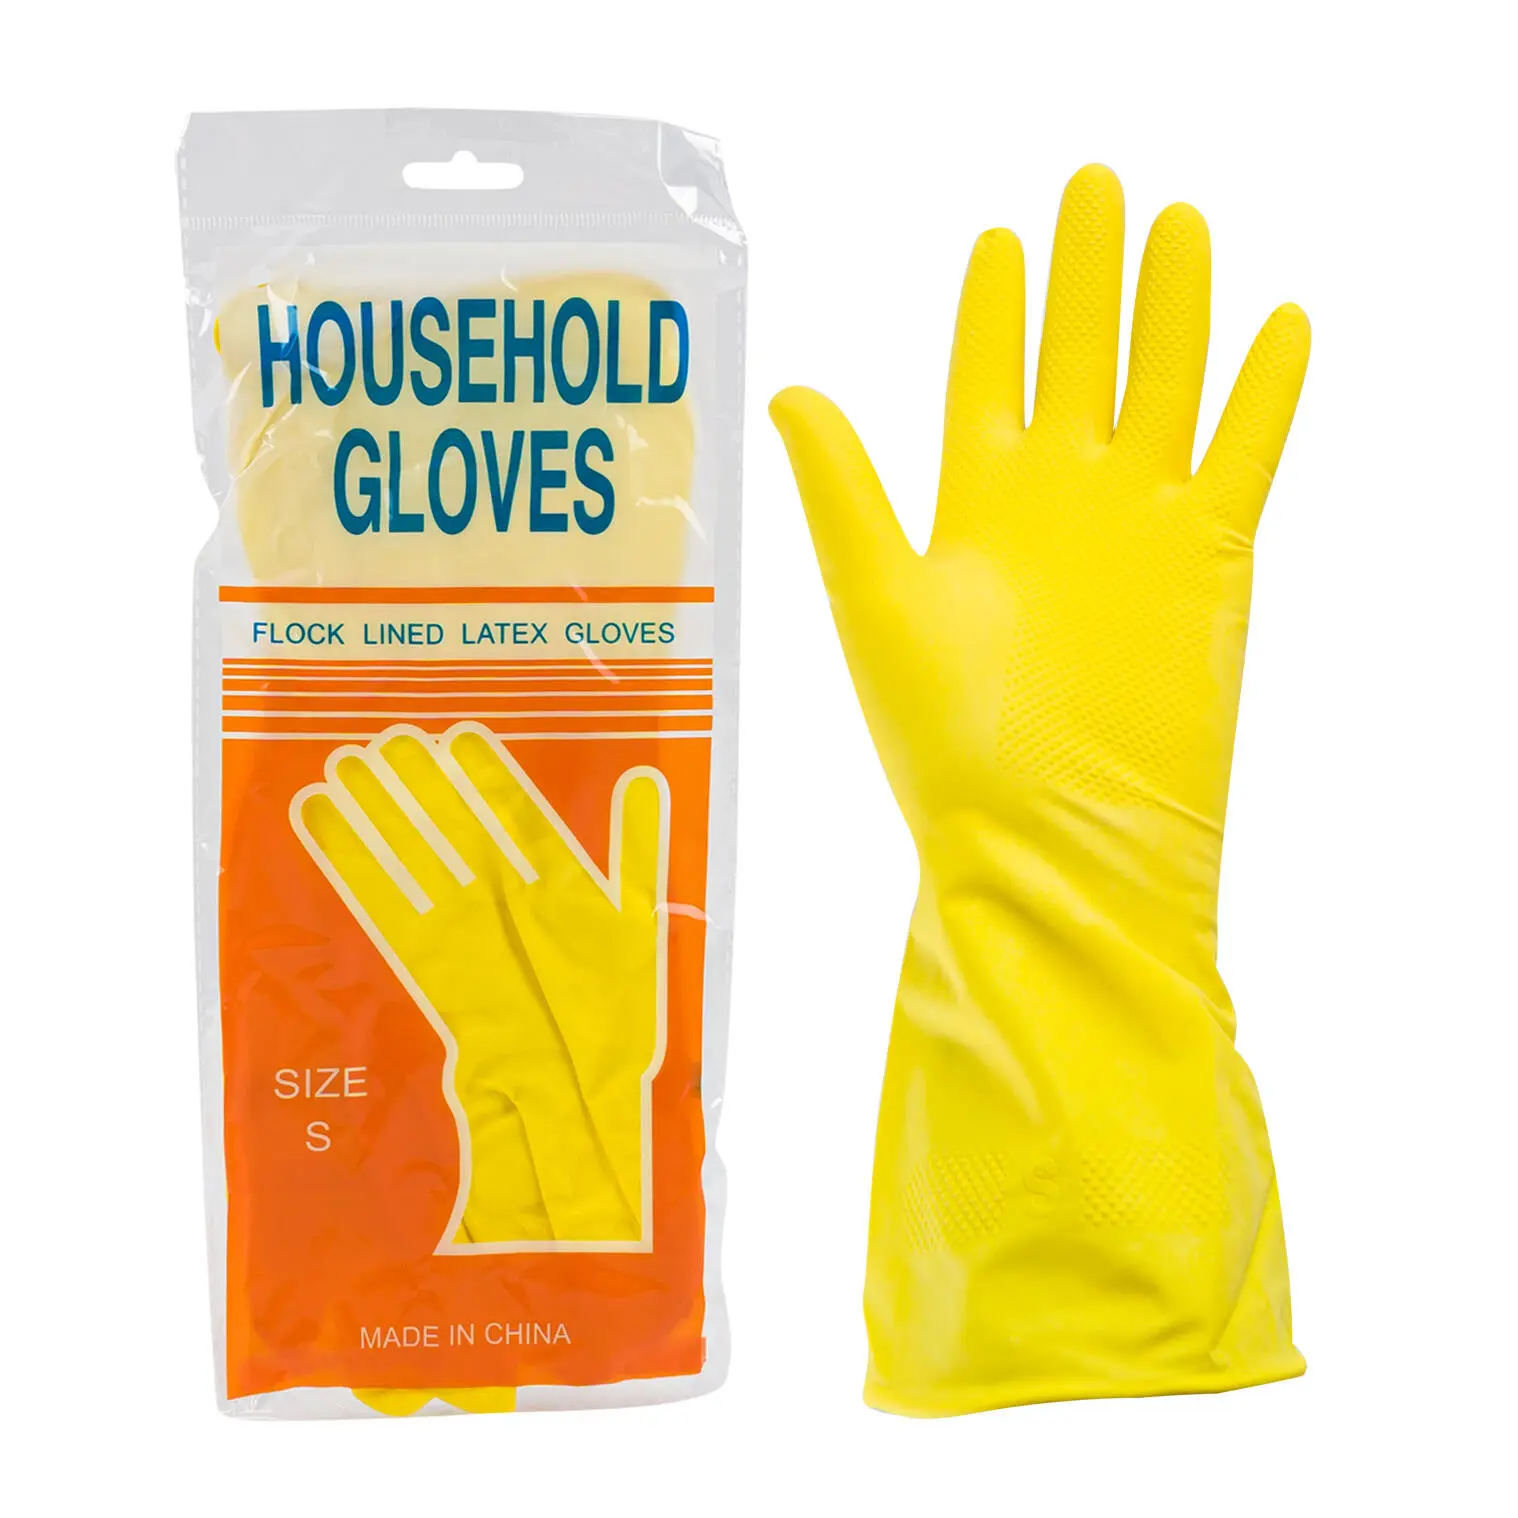 https://theceocreative.com/wp-content/uploads/2023/05/Yellow-Household-Latex-Gloves.webp